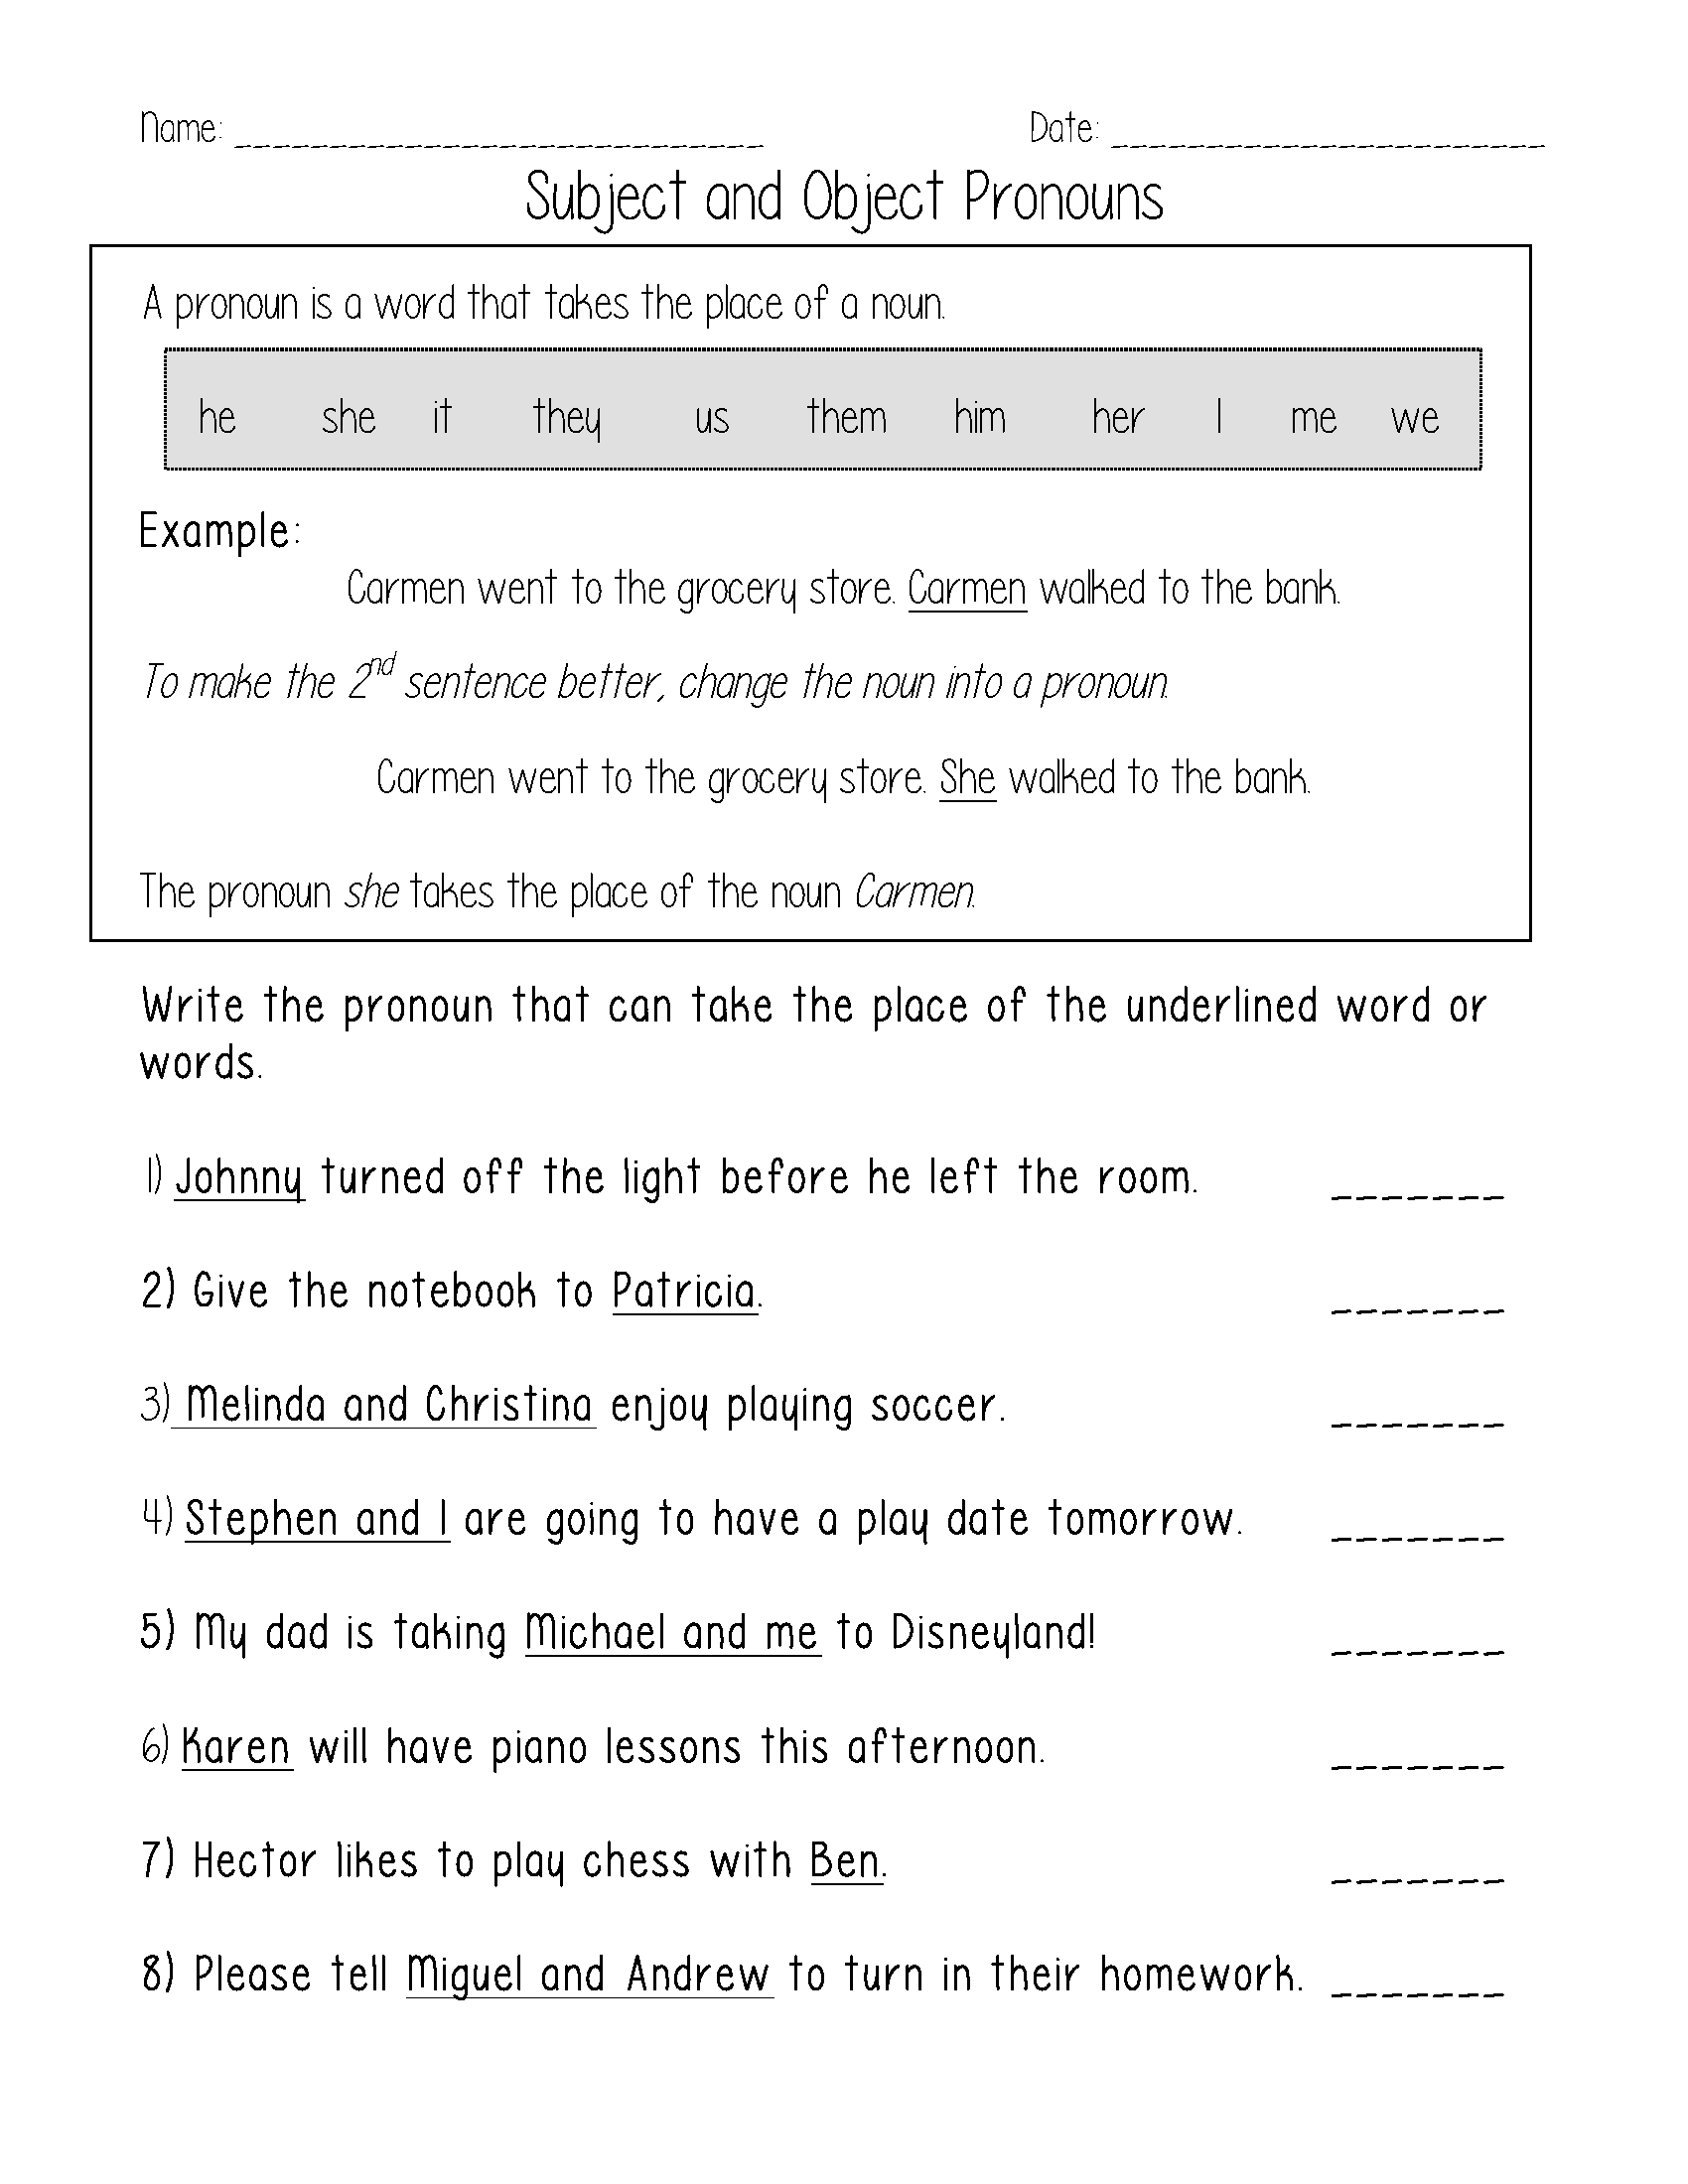 object-pronouns-online-and-pdf-worksheet-you-can-do-the-exercises